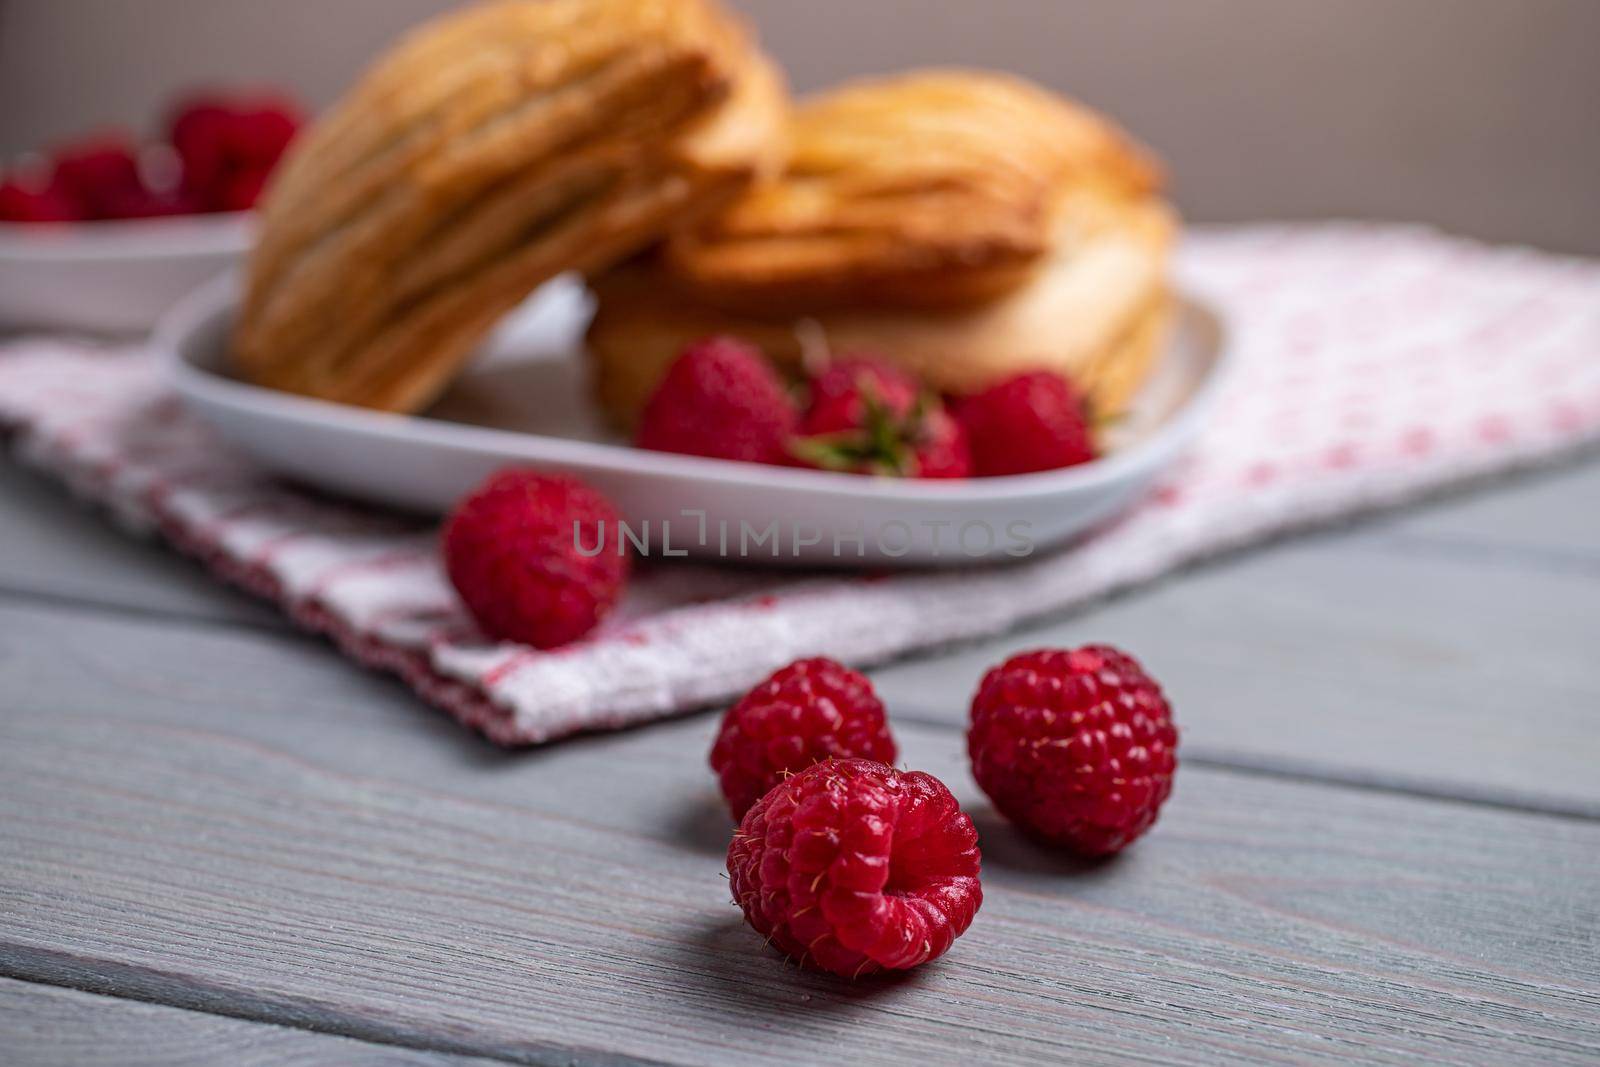 Delicious fresh croissants and sweet raspberry puffs on a wooden table. Selected focus.